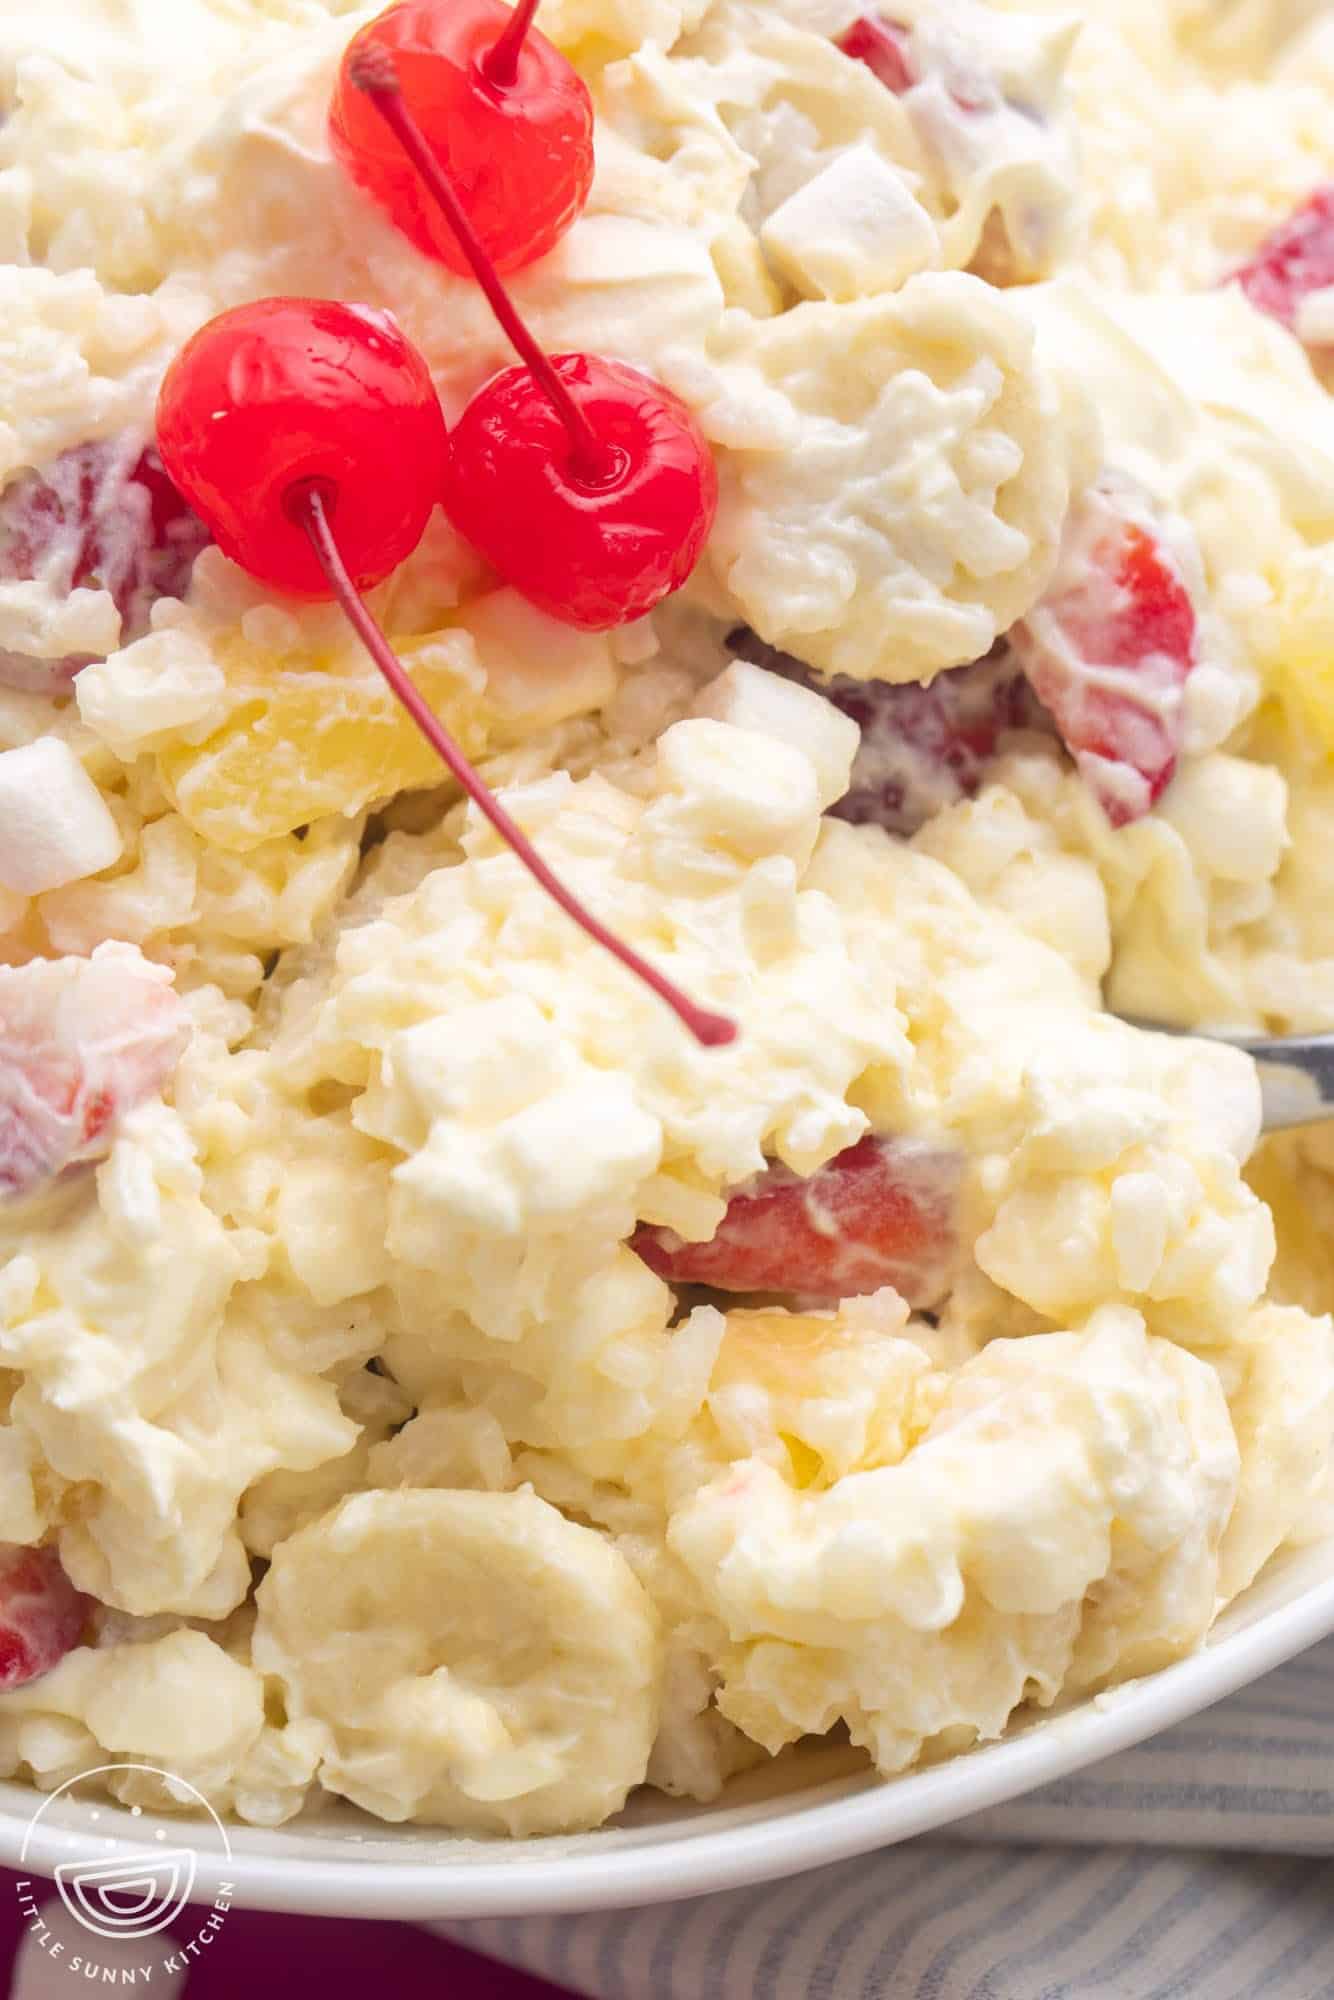 closeup of a bowl of creamy glorified rice with bananas, strawberries, and pineapple, topped with three stemmed cherries.